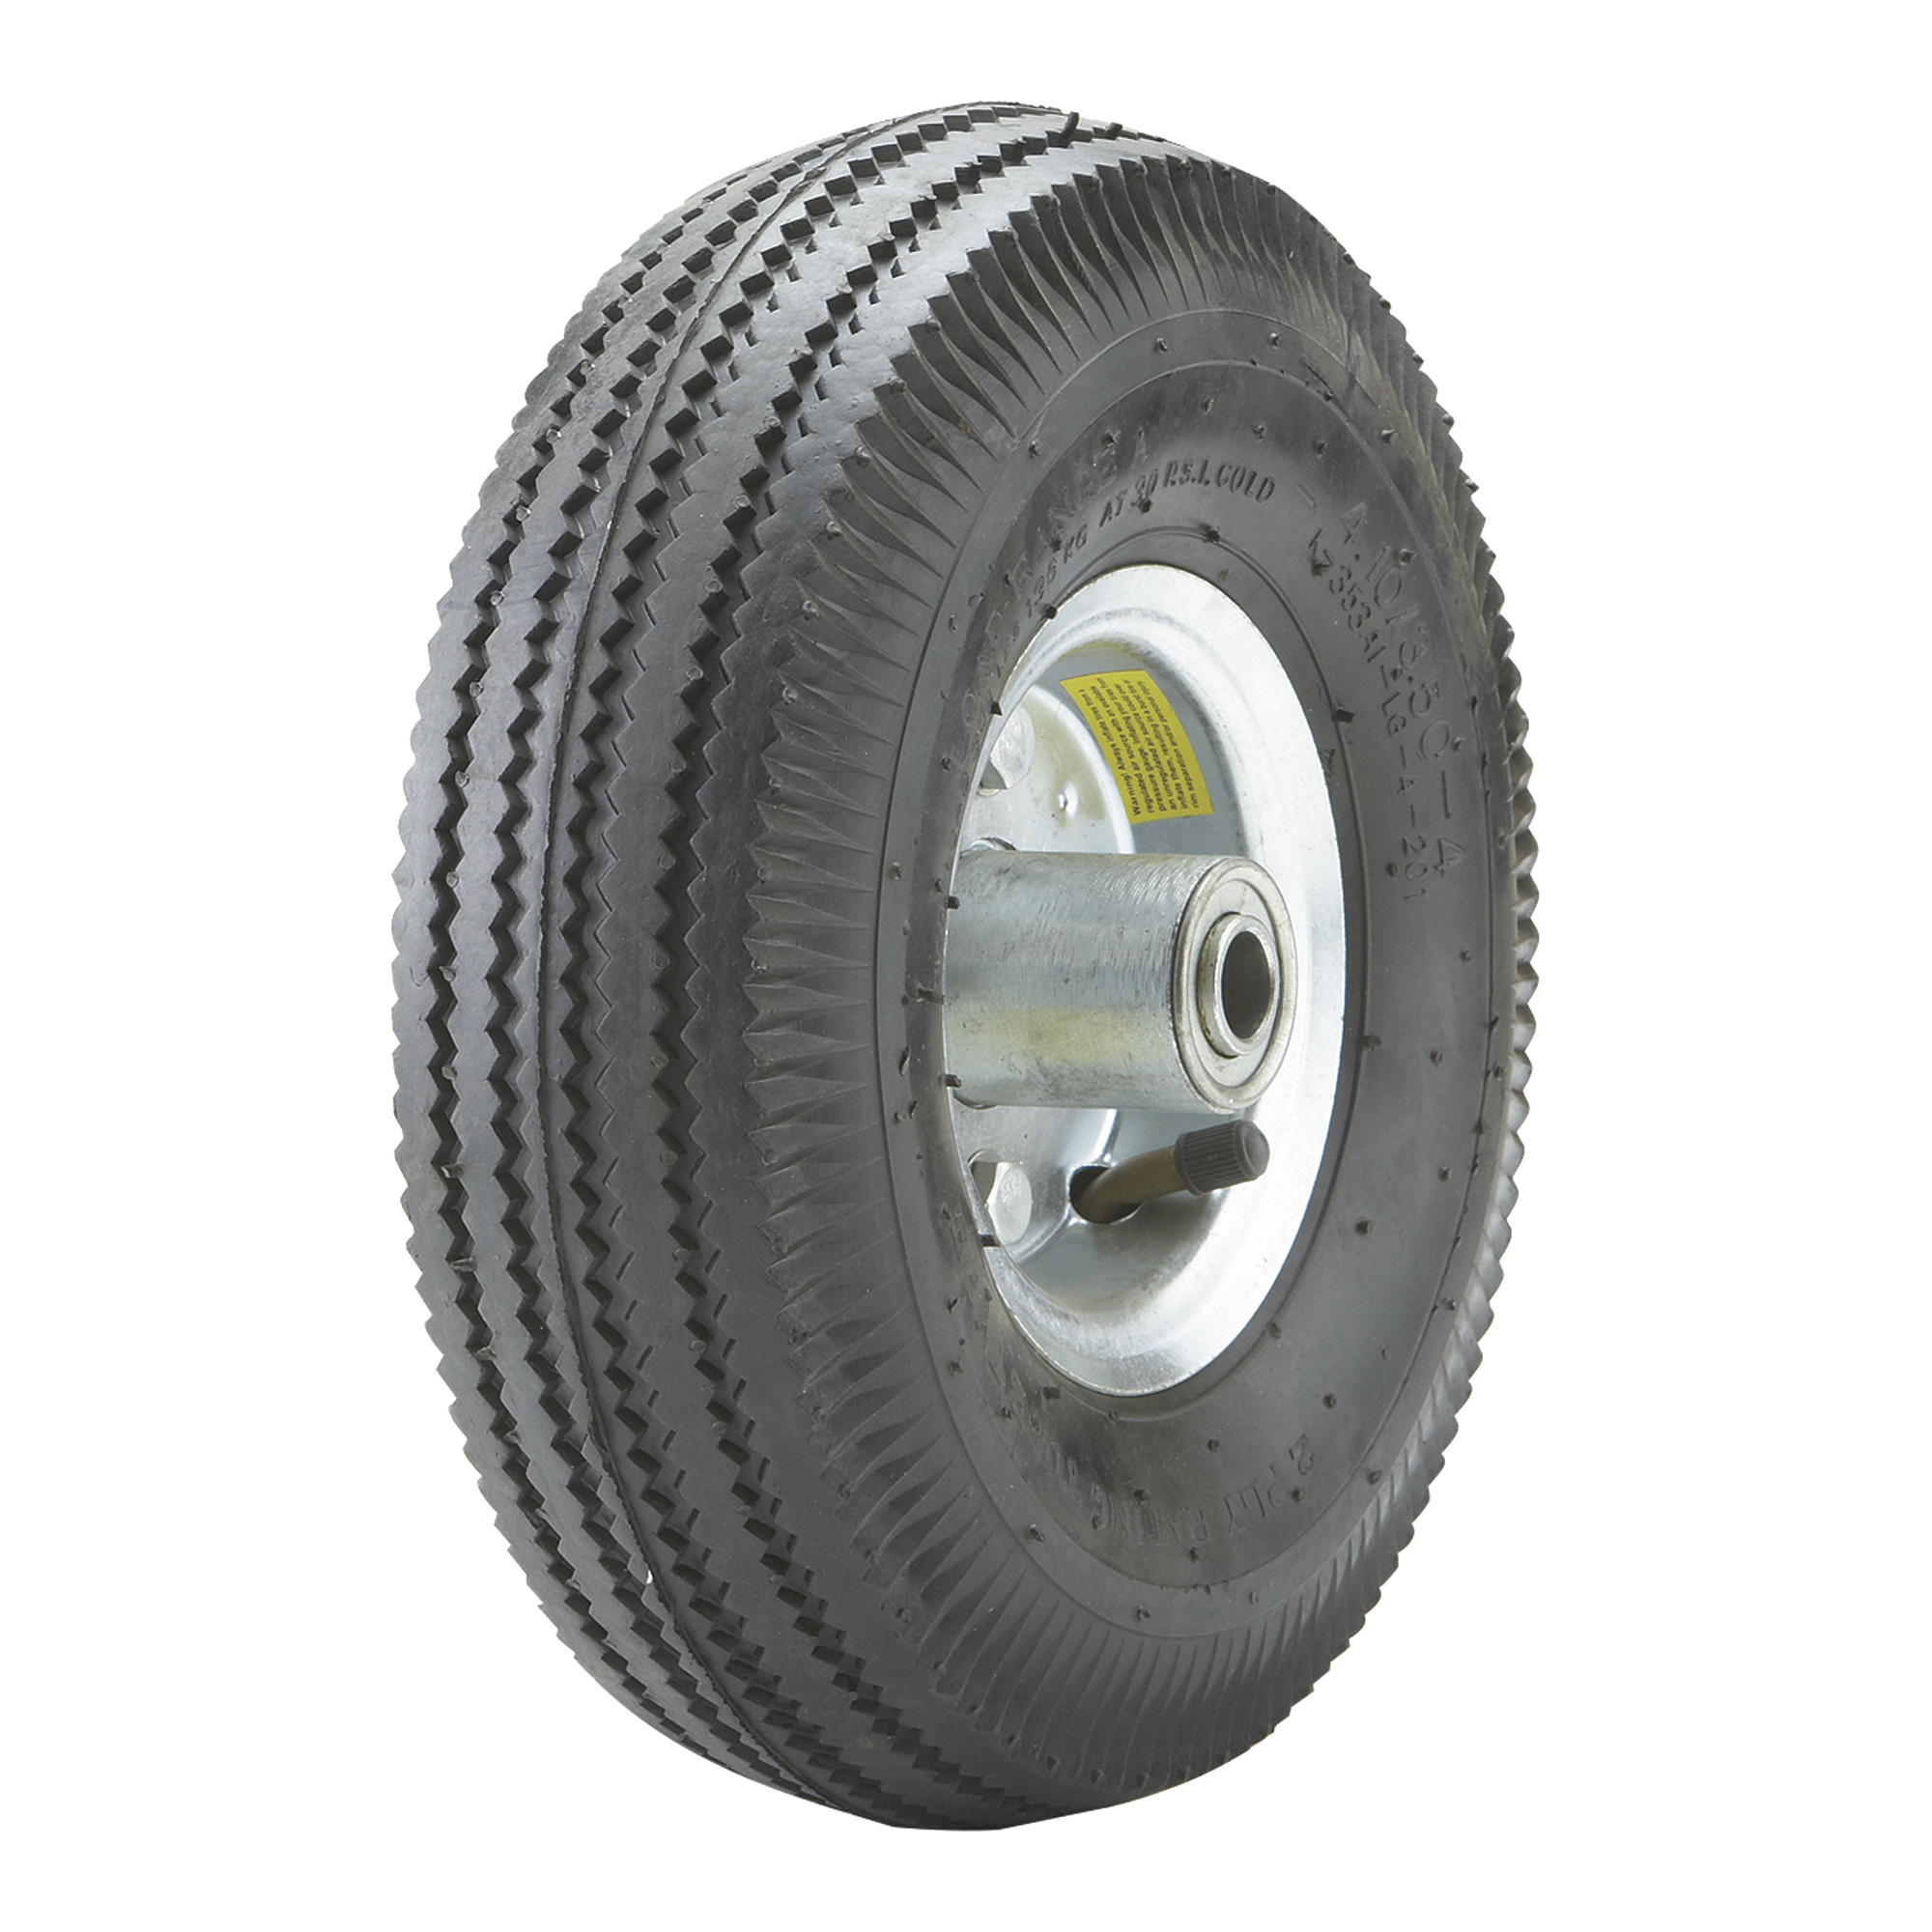 Pneumatic Tire and Wheel, 10Inch x 4.10/3.50-4